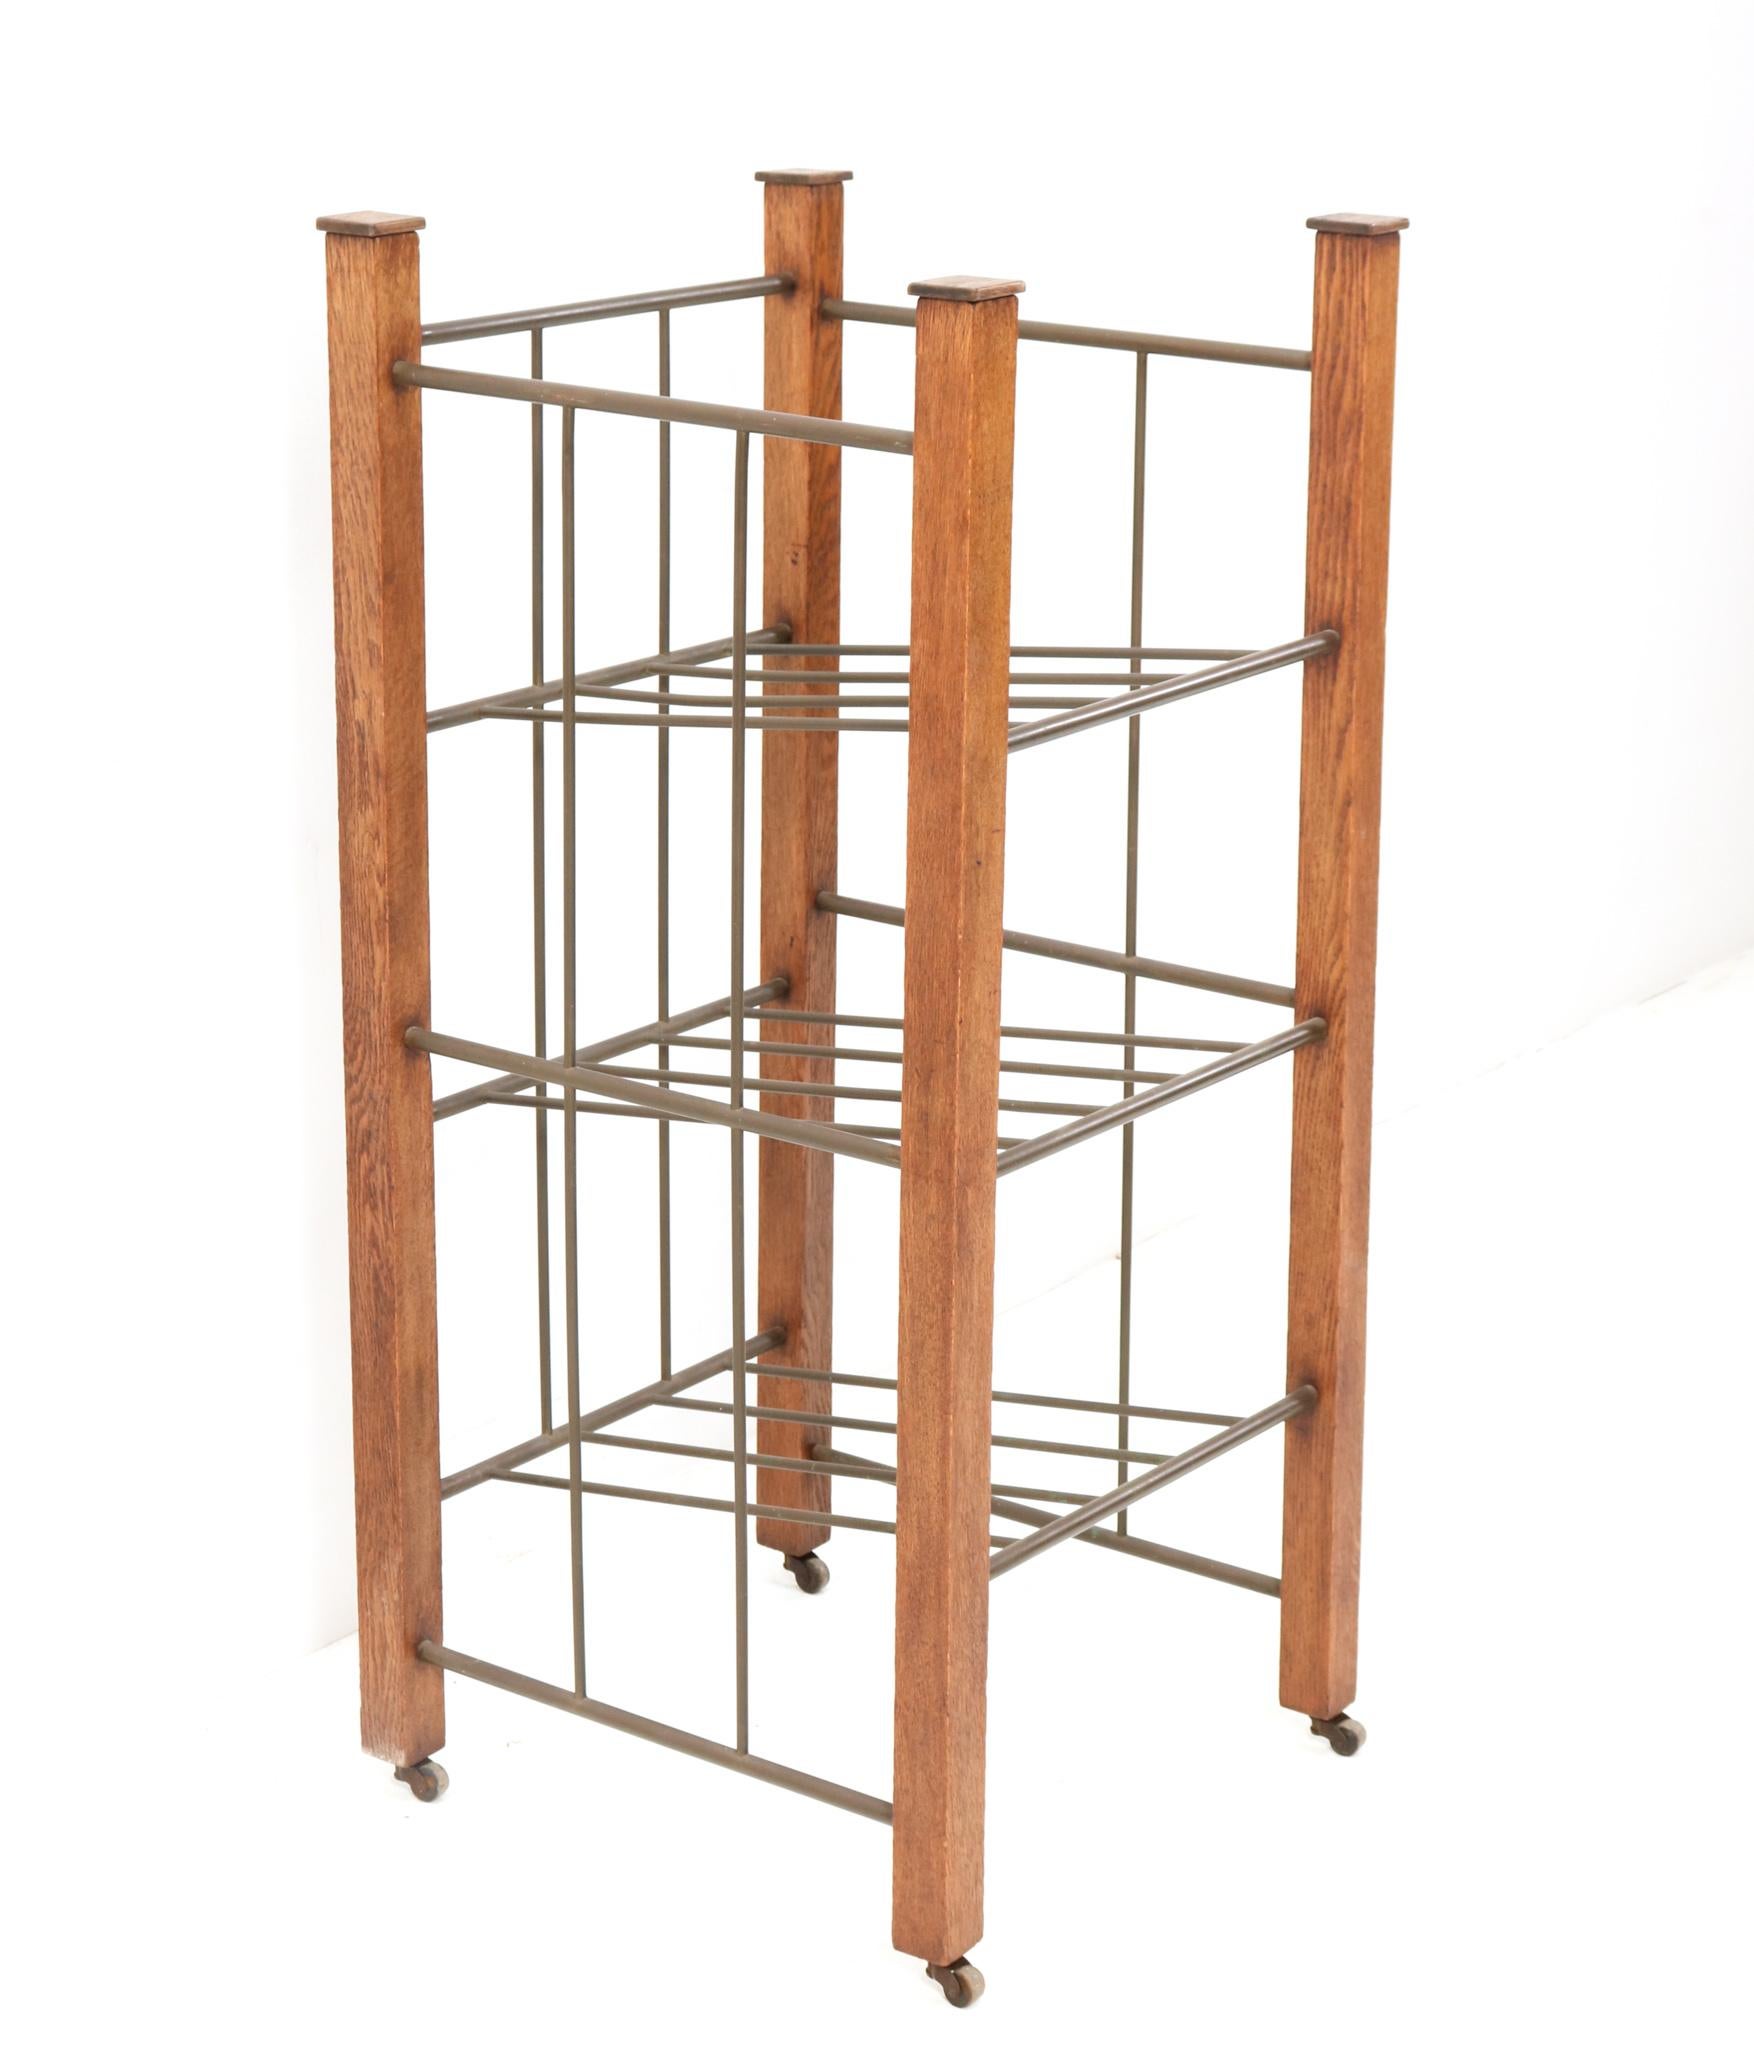 Magnificent and rare extra large Art Deco Modernist magazine rack or stand.
Striking Dutch design from the 1920s.
Solid oak frame with original patinated brass tubes.
This wonderful extra large Art Deco magazine rack or stand is in very good